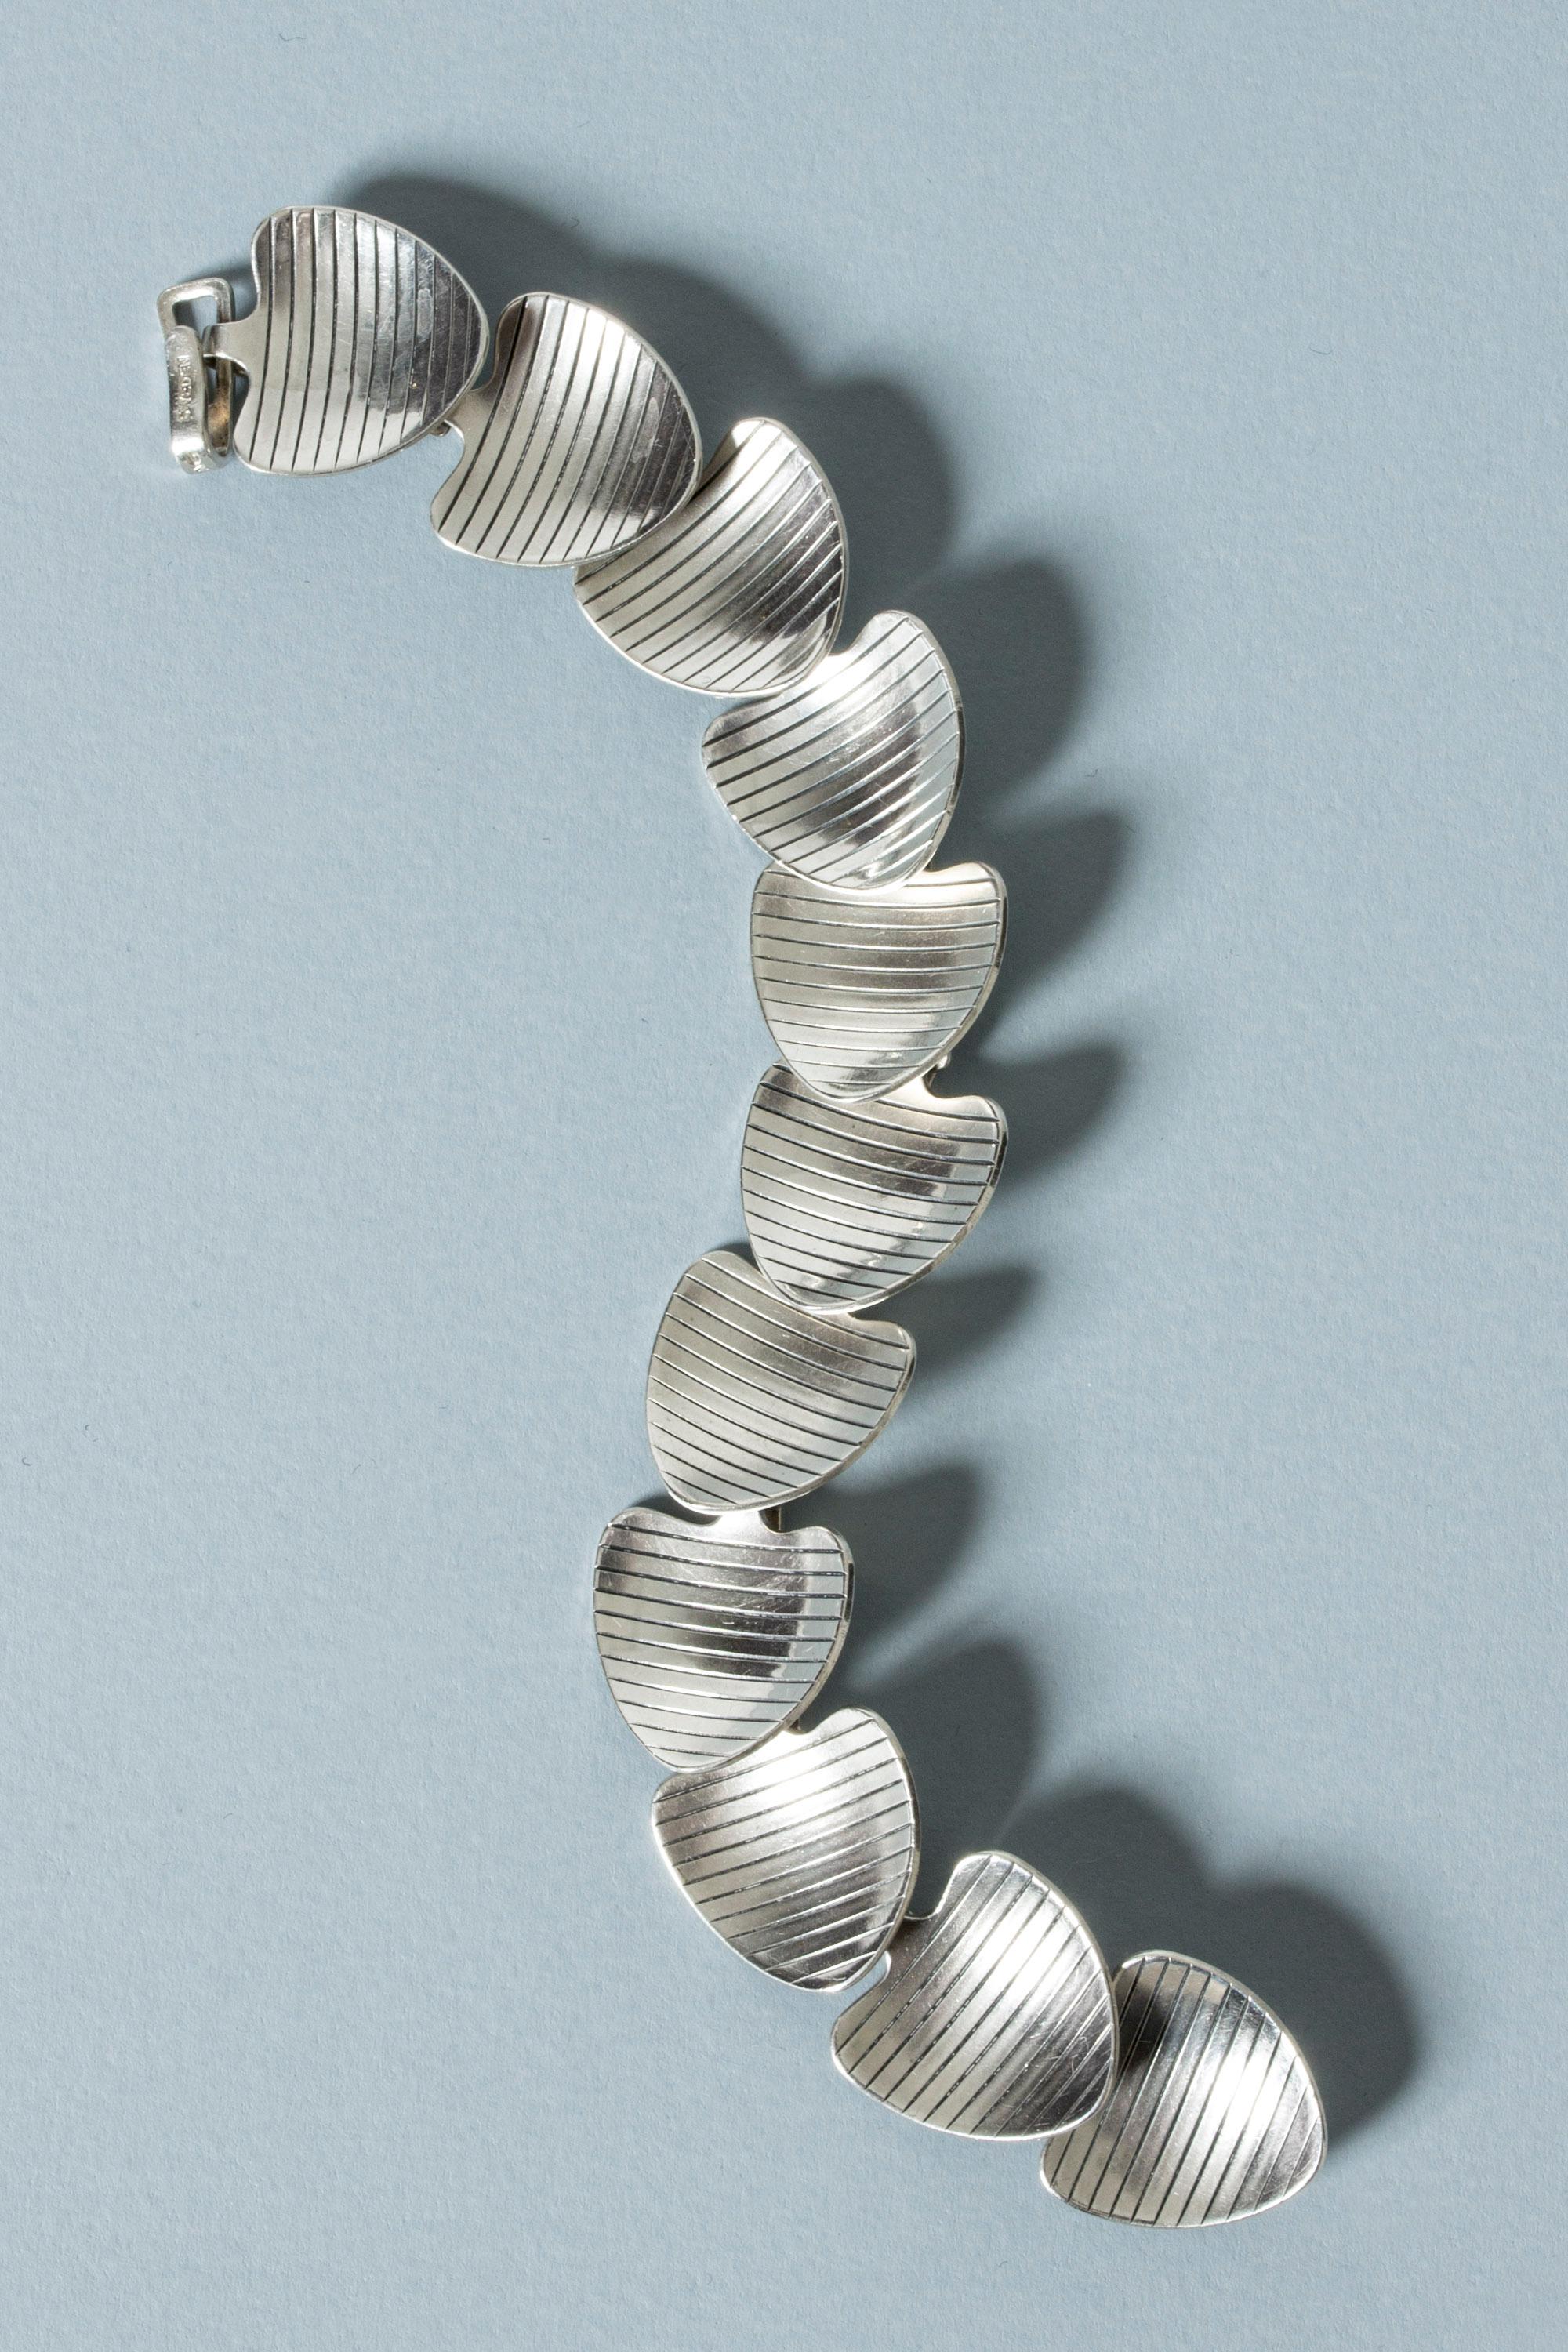 Elegant silver bracelet from Atelier Borgila, made from slightly concave segments in the form of stylized leaves. Decorative stripes.

